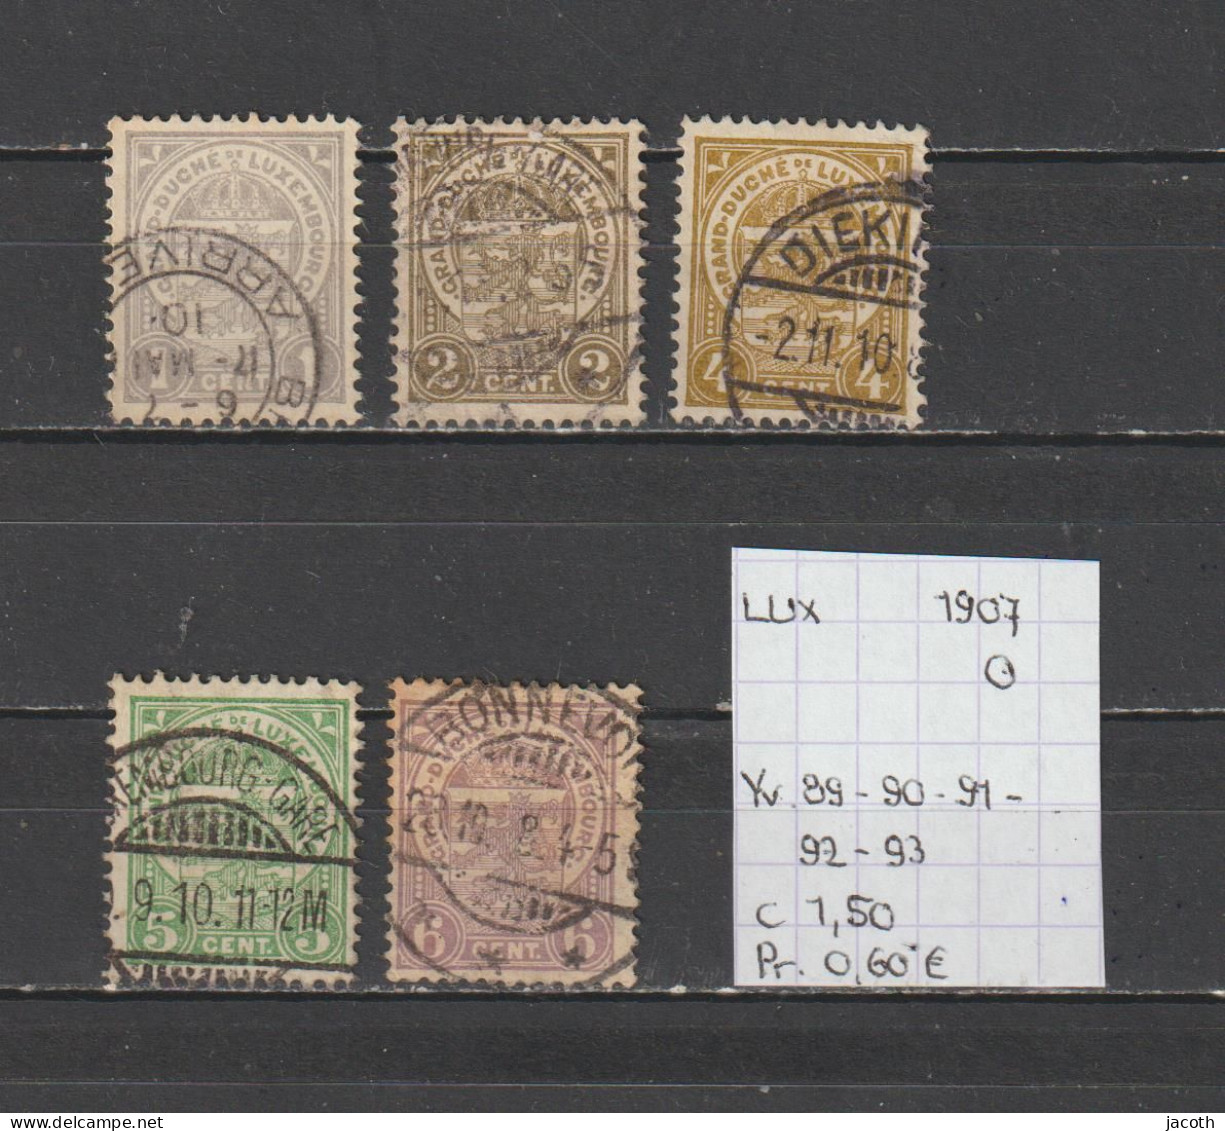 (TJ) Luxembourg 1907 - YT 89 + 90 + 91 + 92 + 93 (gest./obl./used) - 1907-24 Ecusson